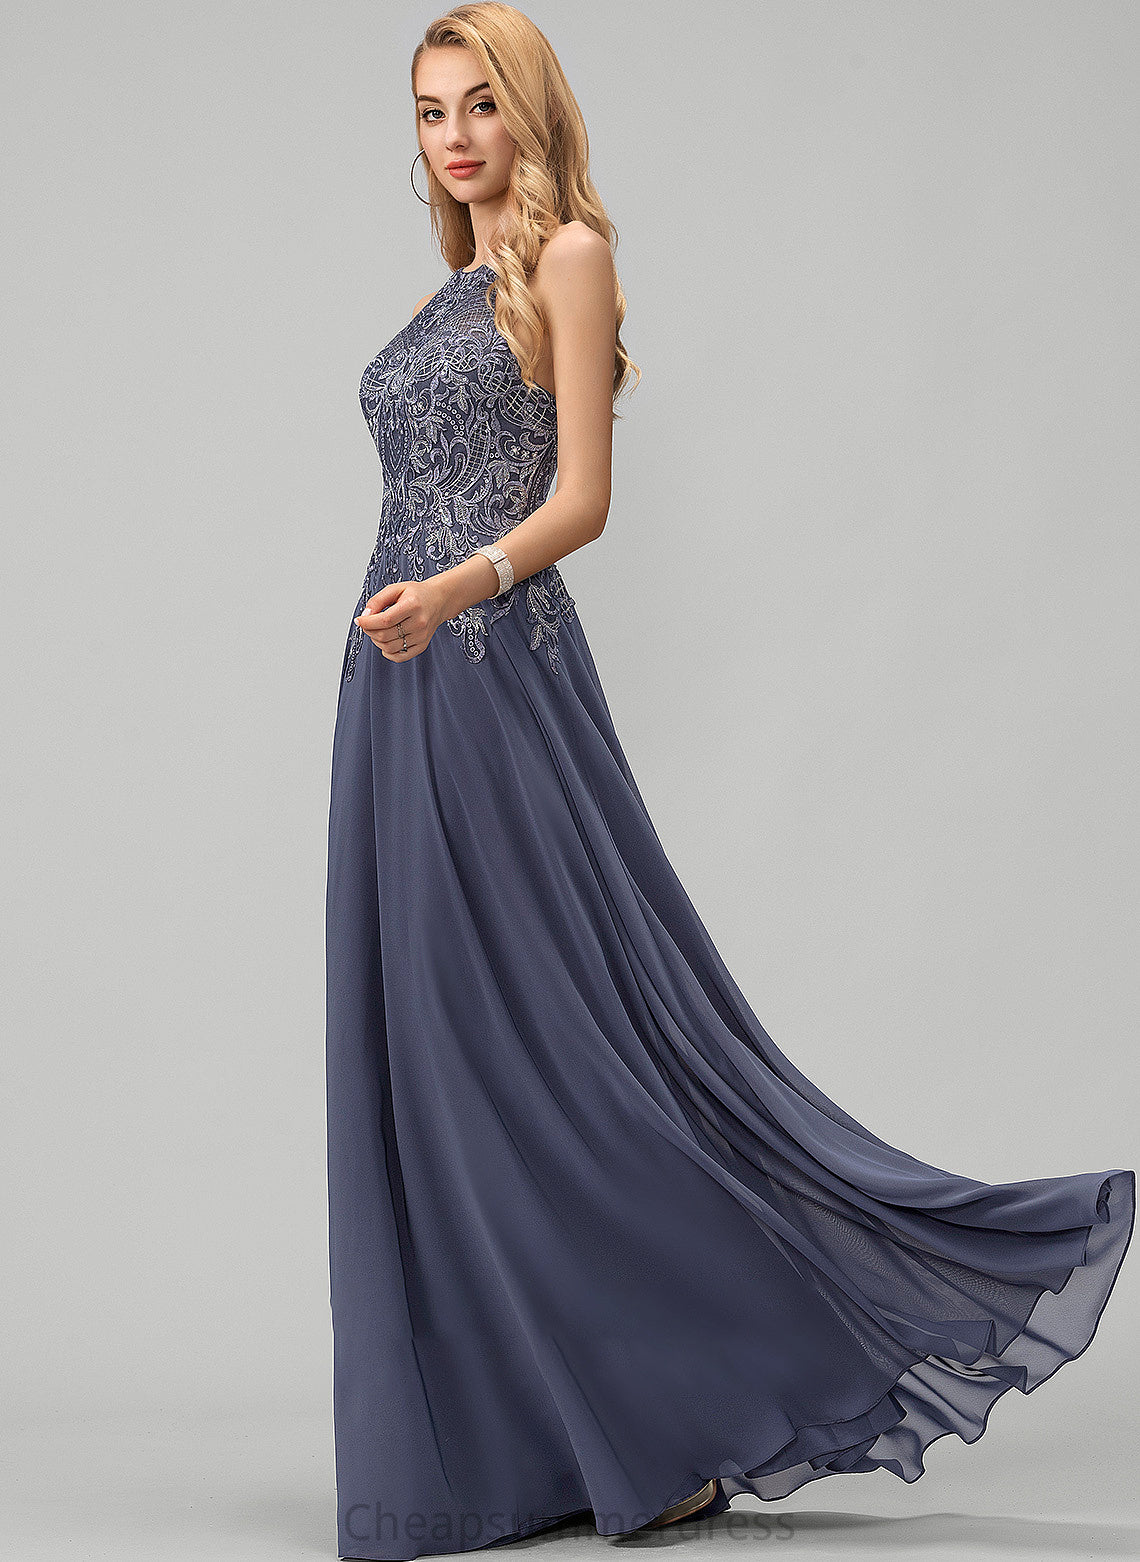 Prom Dresses With Sequins Eva Chiffon A-Line Neck Floor-Length Scoop Lace